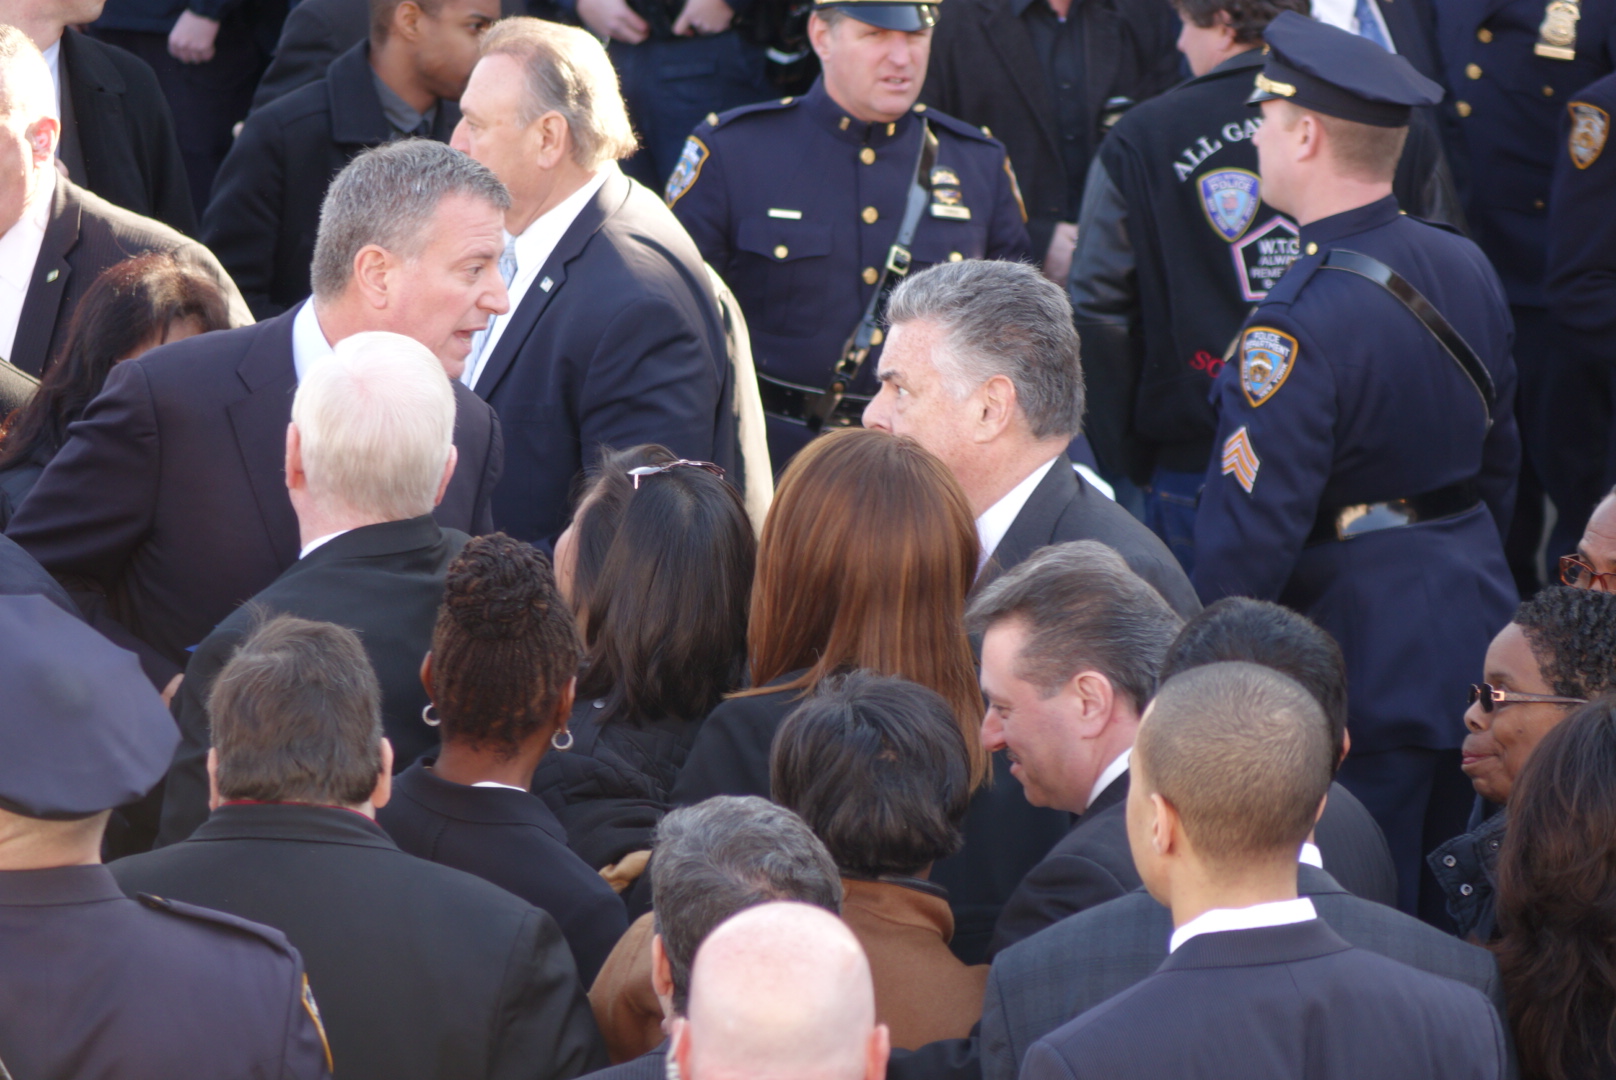 Mayor de Blasio spoke briefly with Rep. Peter King, a harsh critic.